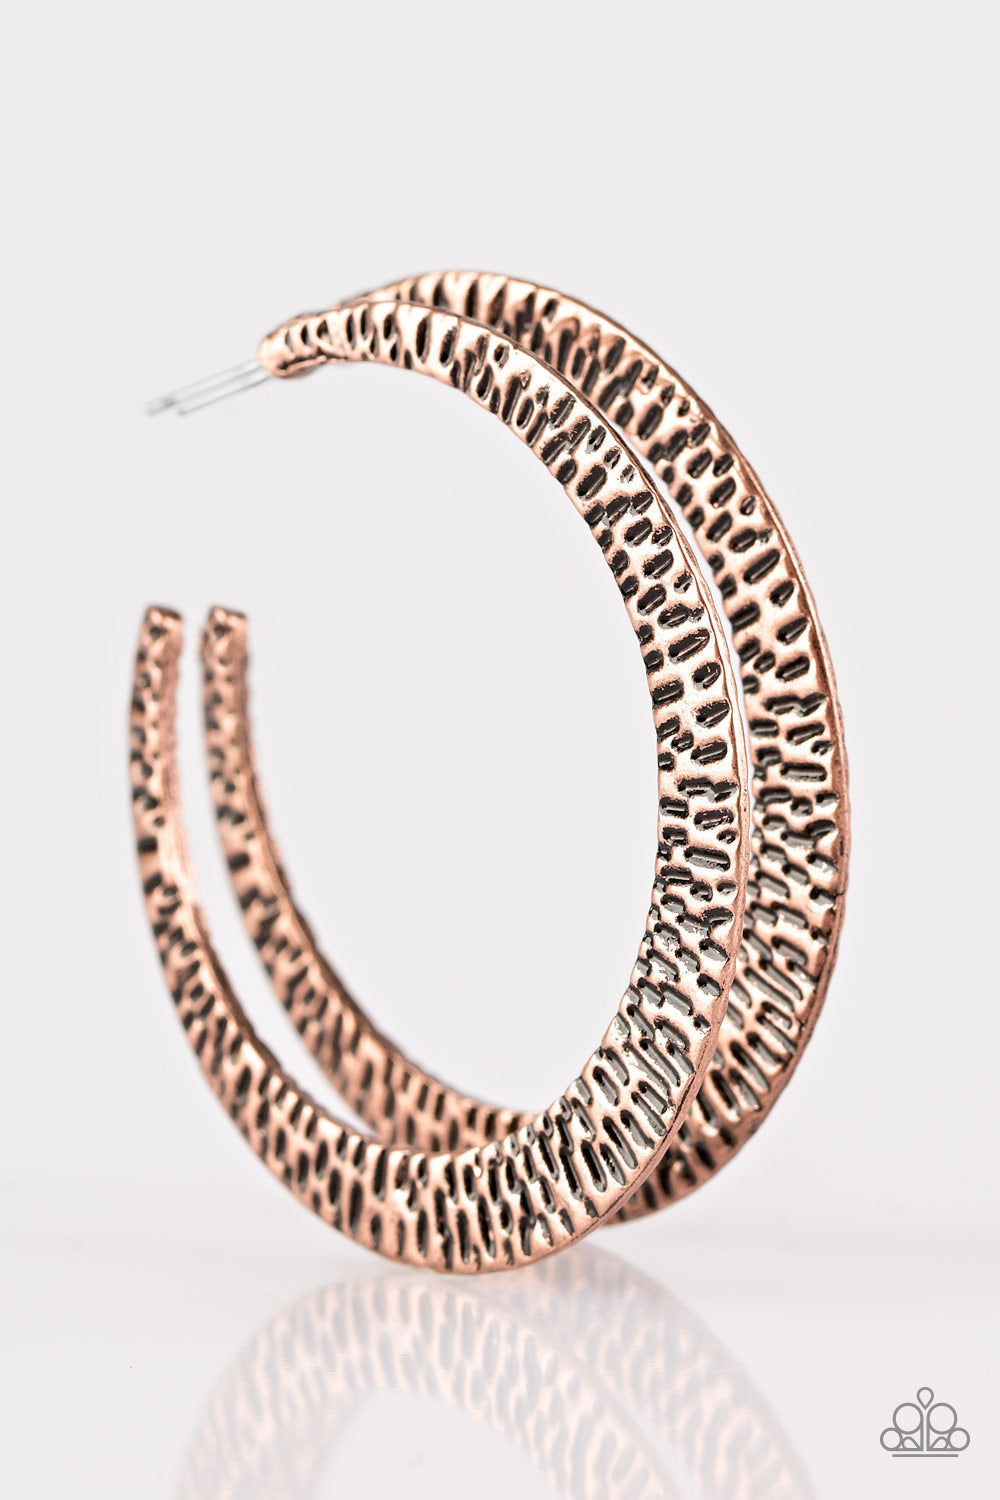 Paparazzi BEAST Friends Forever - Copper Hoop Earrings - A Finishing Touch 